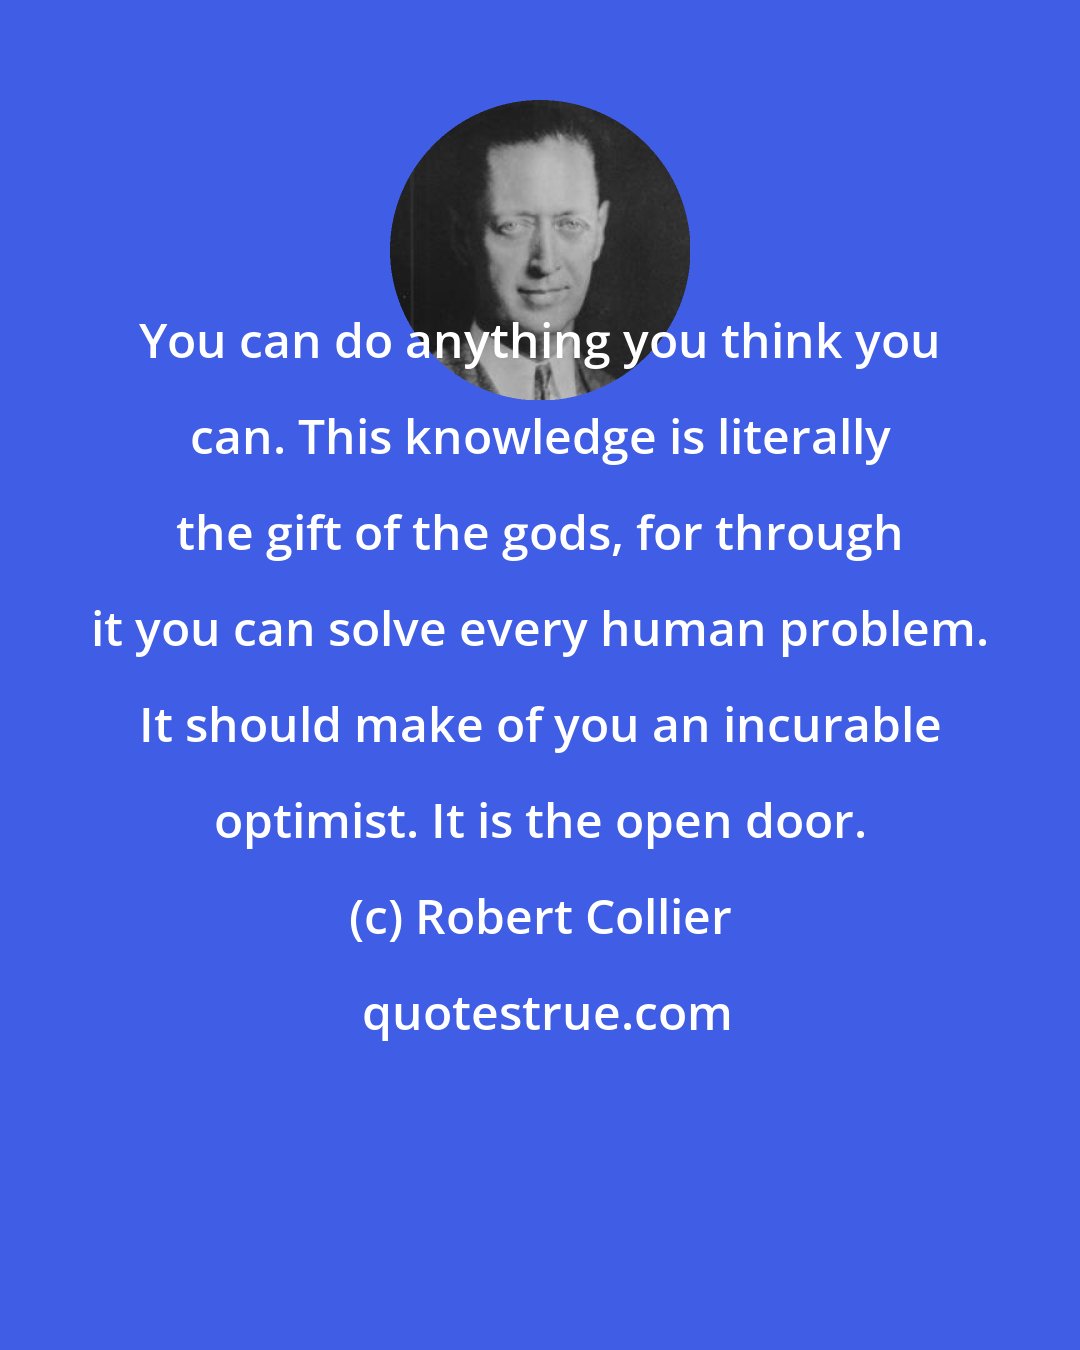 Robert Collier: You can do anything you think you can. This knowledge is literally the gift of the gods, for through it you can solve every human problem. It should make of you an incurable optimist. It is the open door.